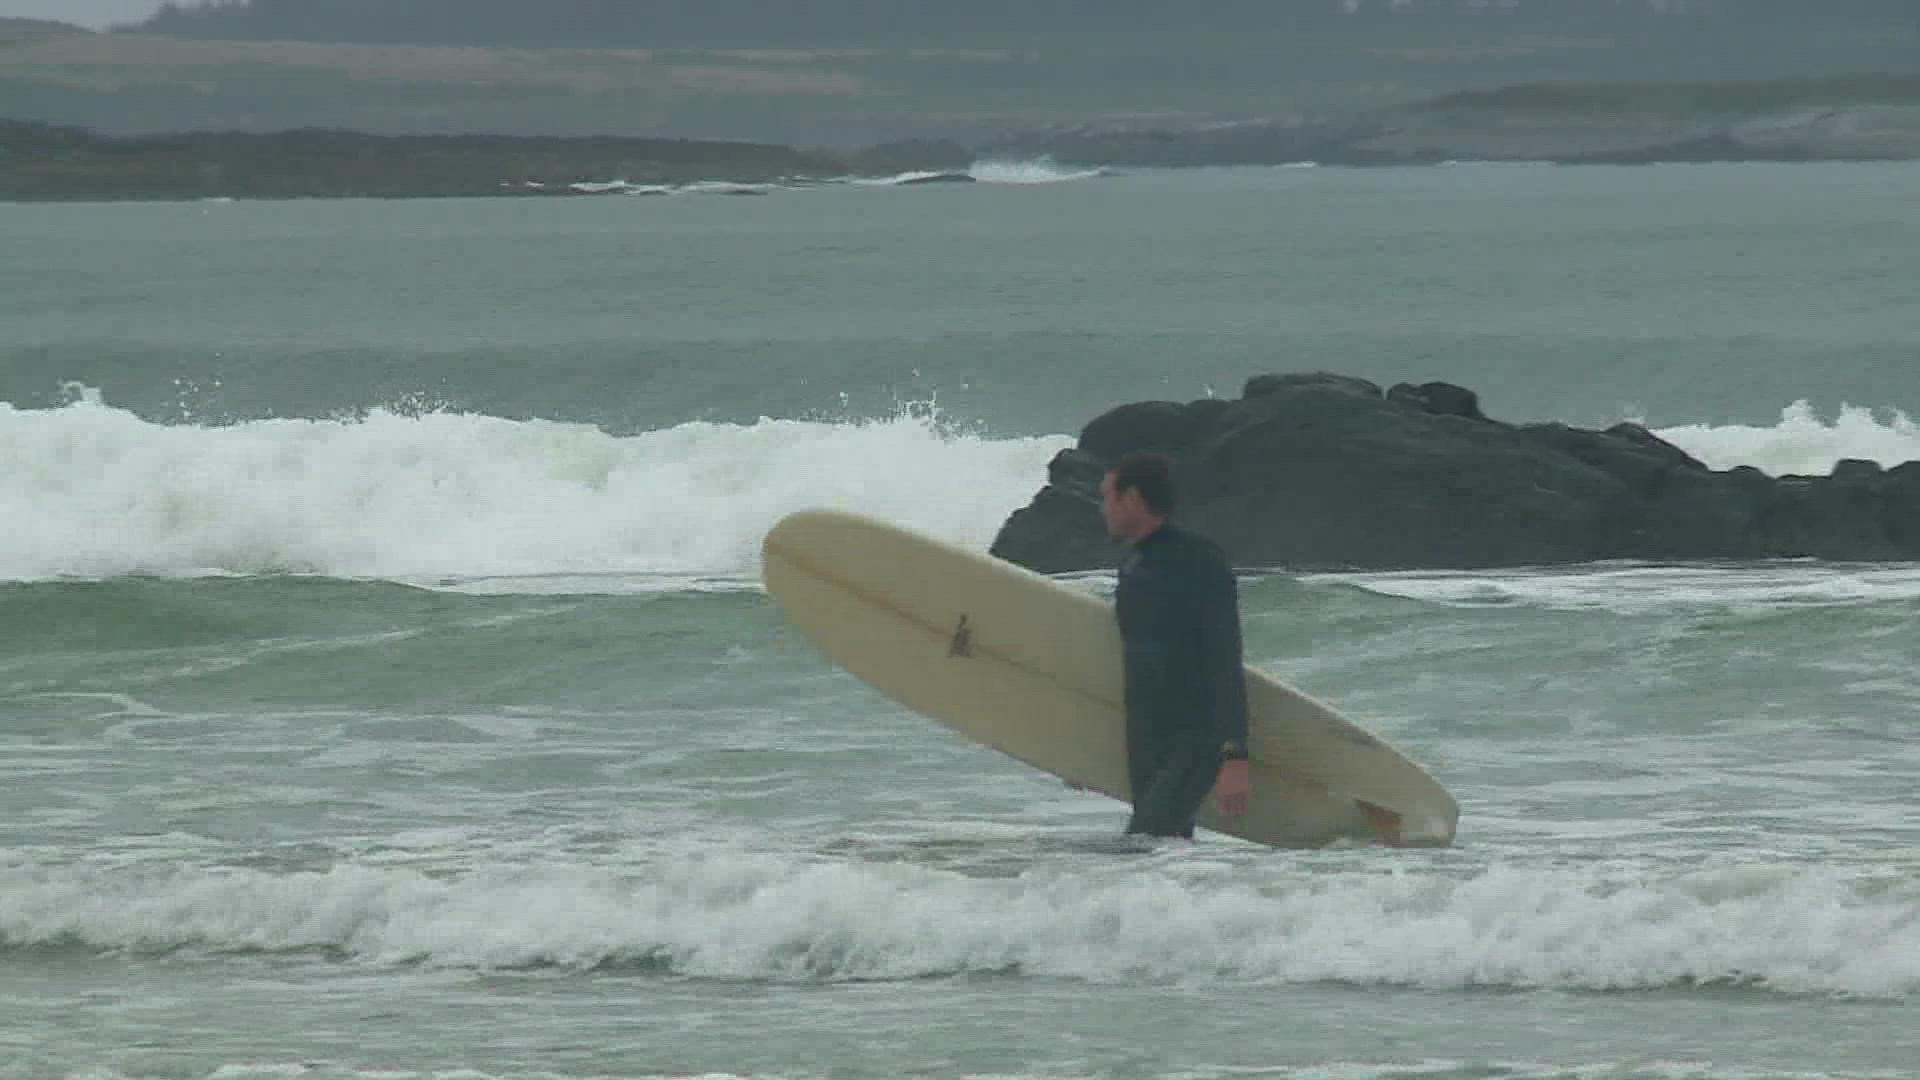 As Wednesday's storm brought choppy waters to Maine shores, local surfers took advantage and hit the waves despite the rain.